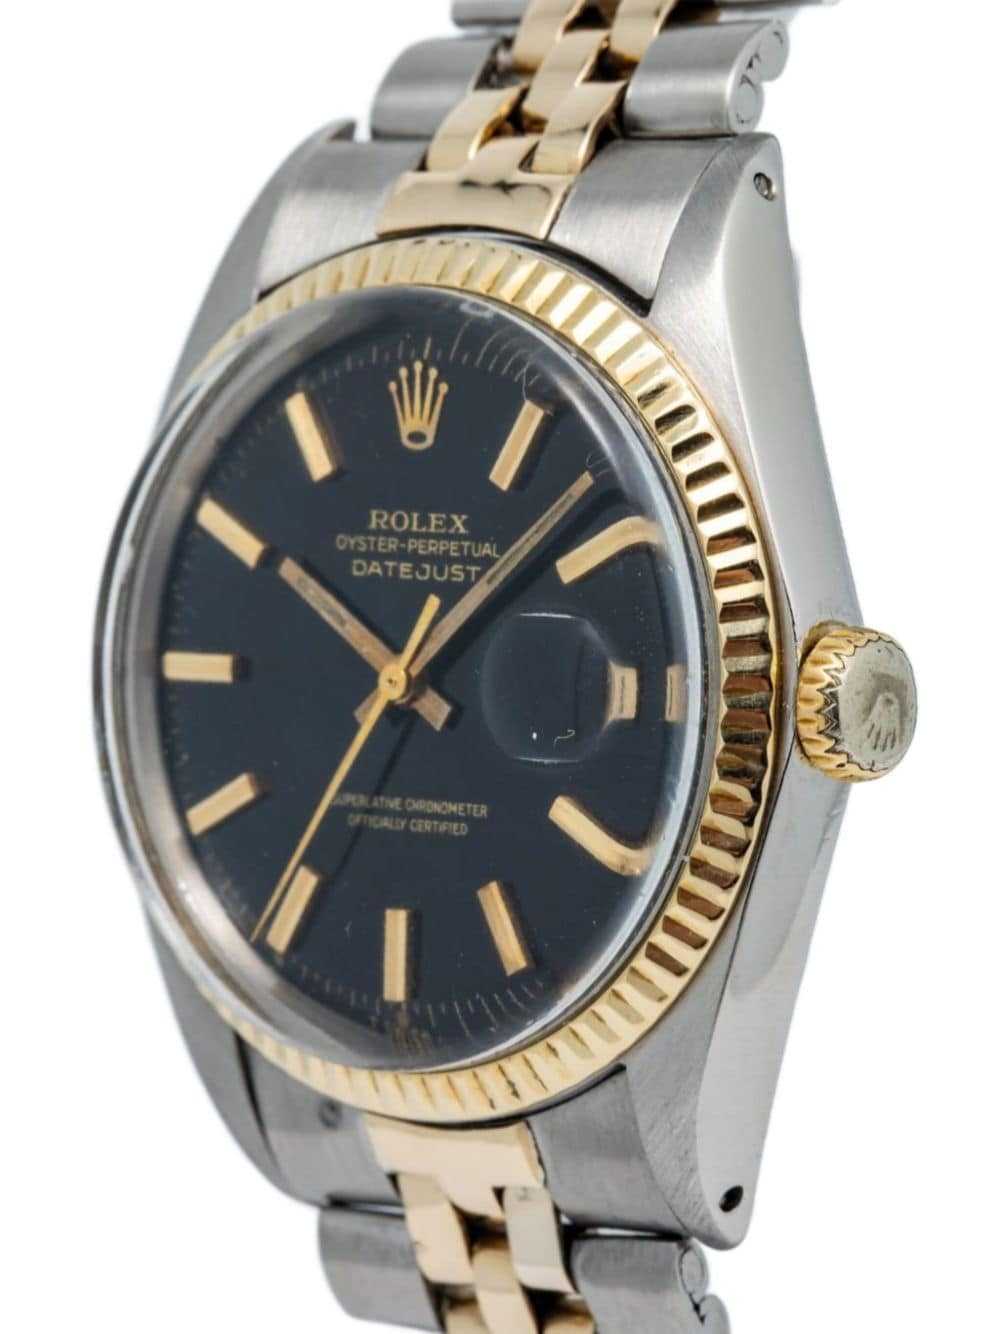 Rolex pre-owned Datejust 36mm - Black - image 3